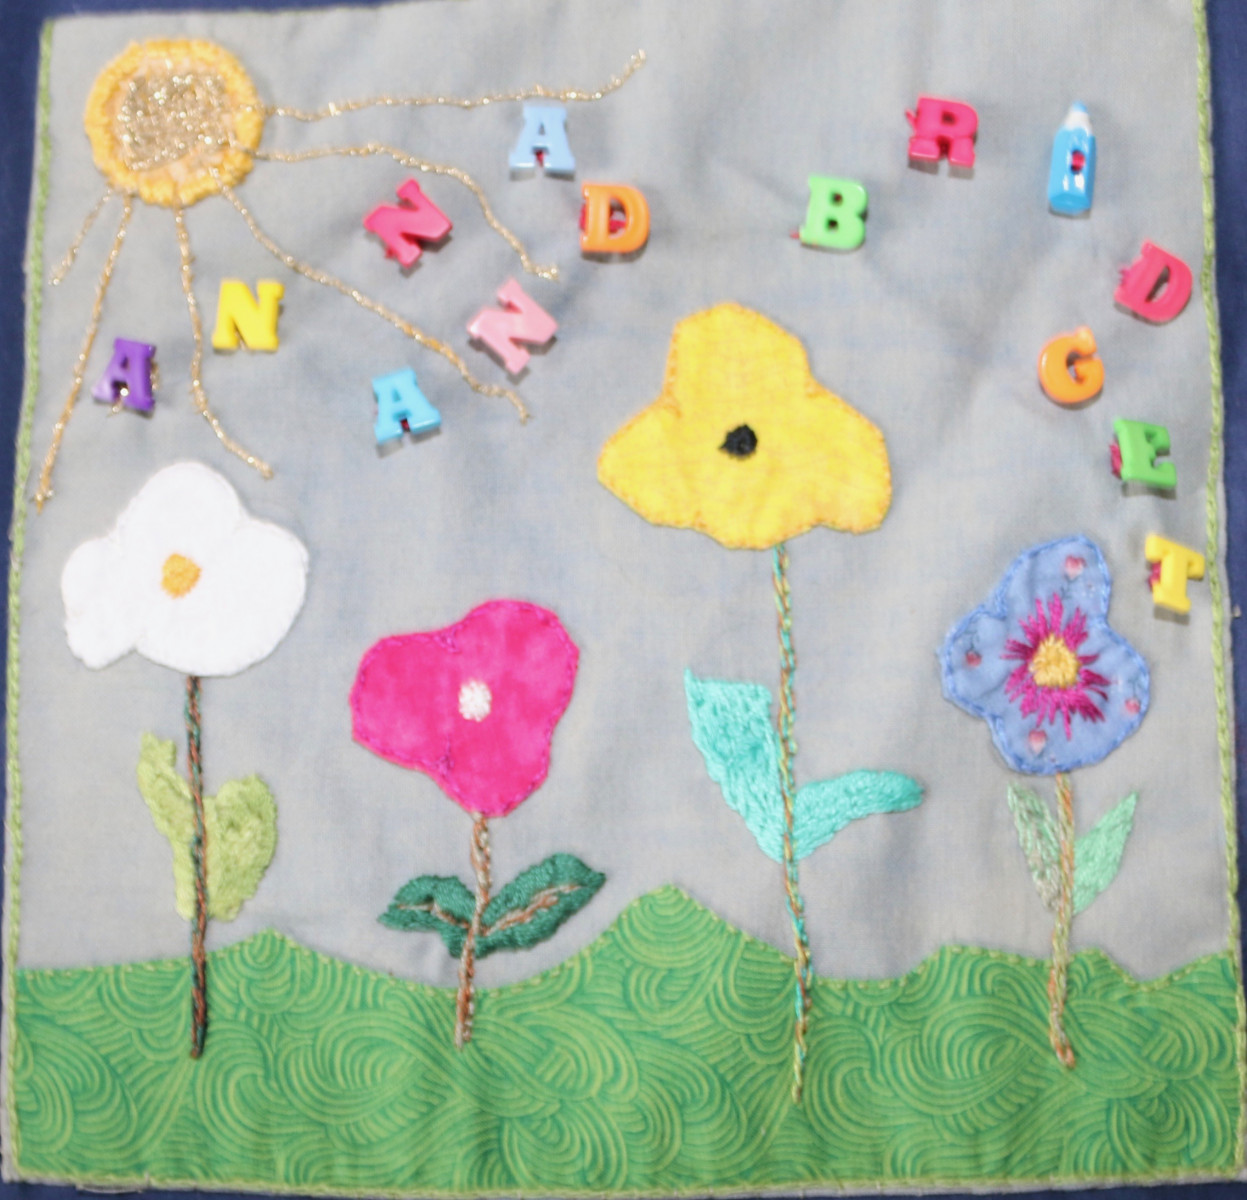 Colage/embroidery of flowers